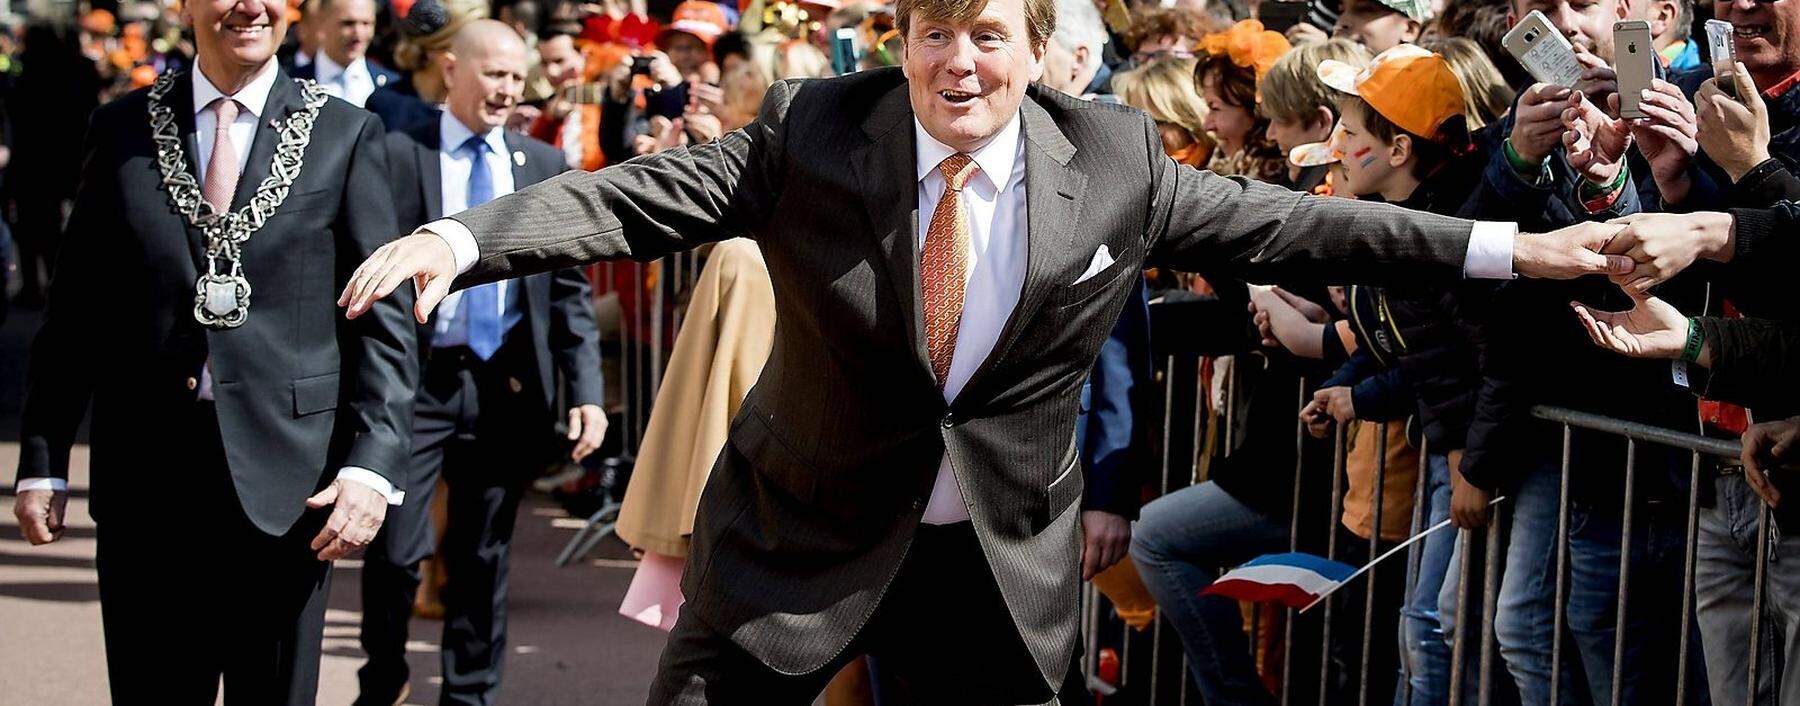 King Willem-Alexander and Queen Maxima of the Netherlands pose with their daughters in Wassenaar